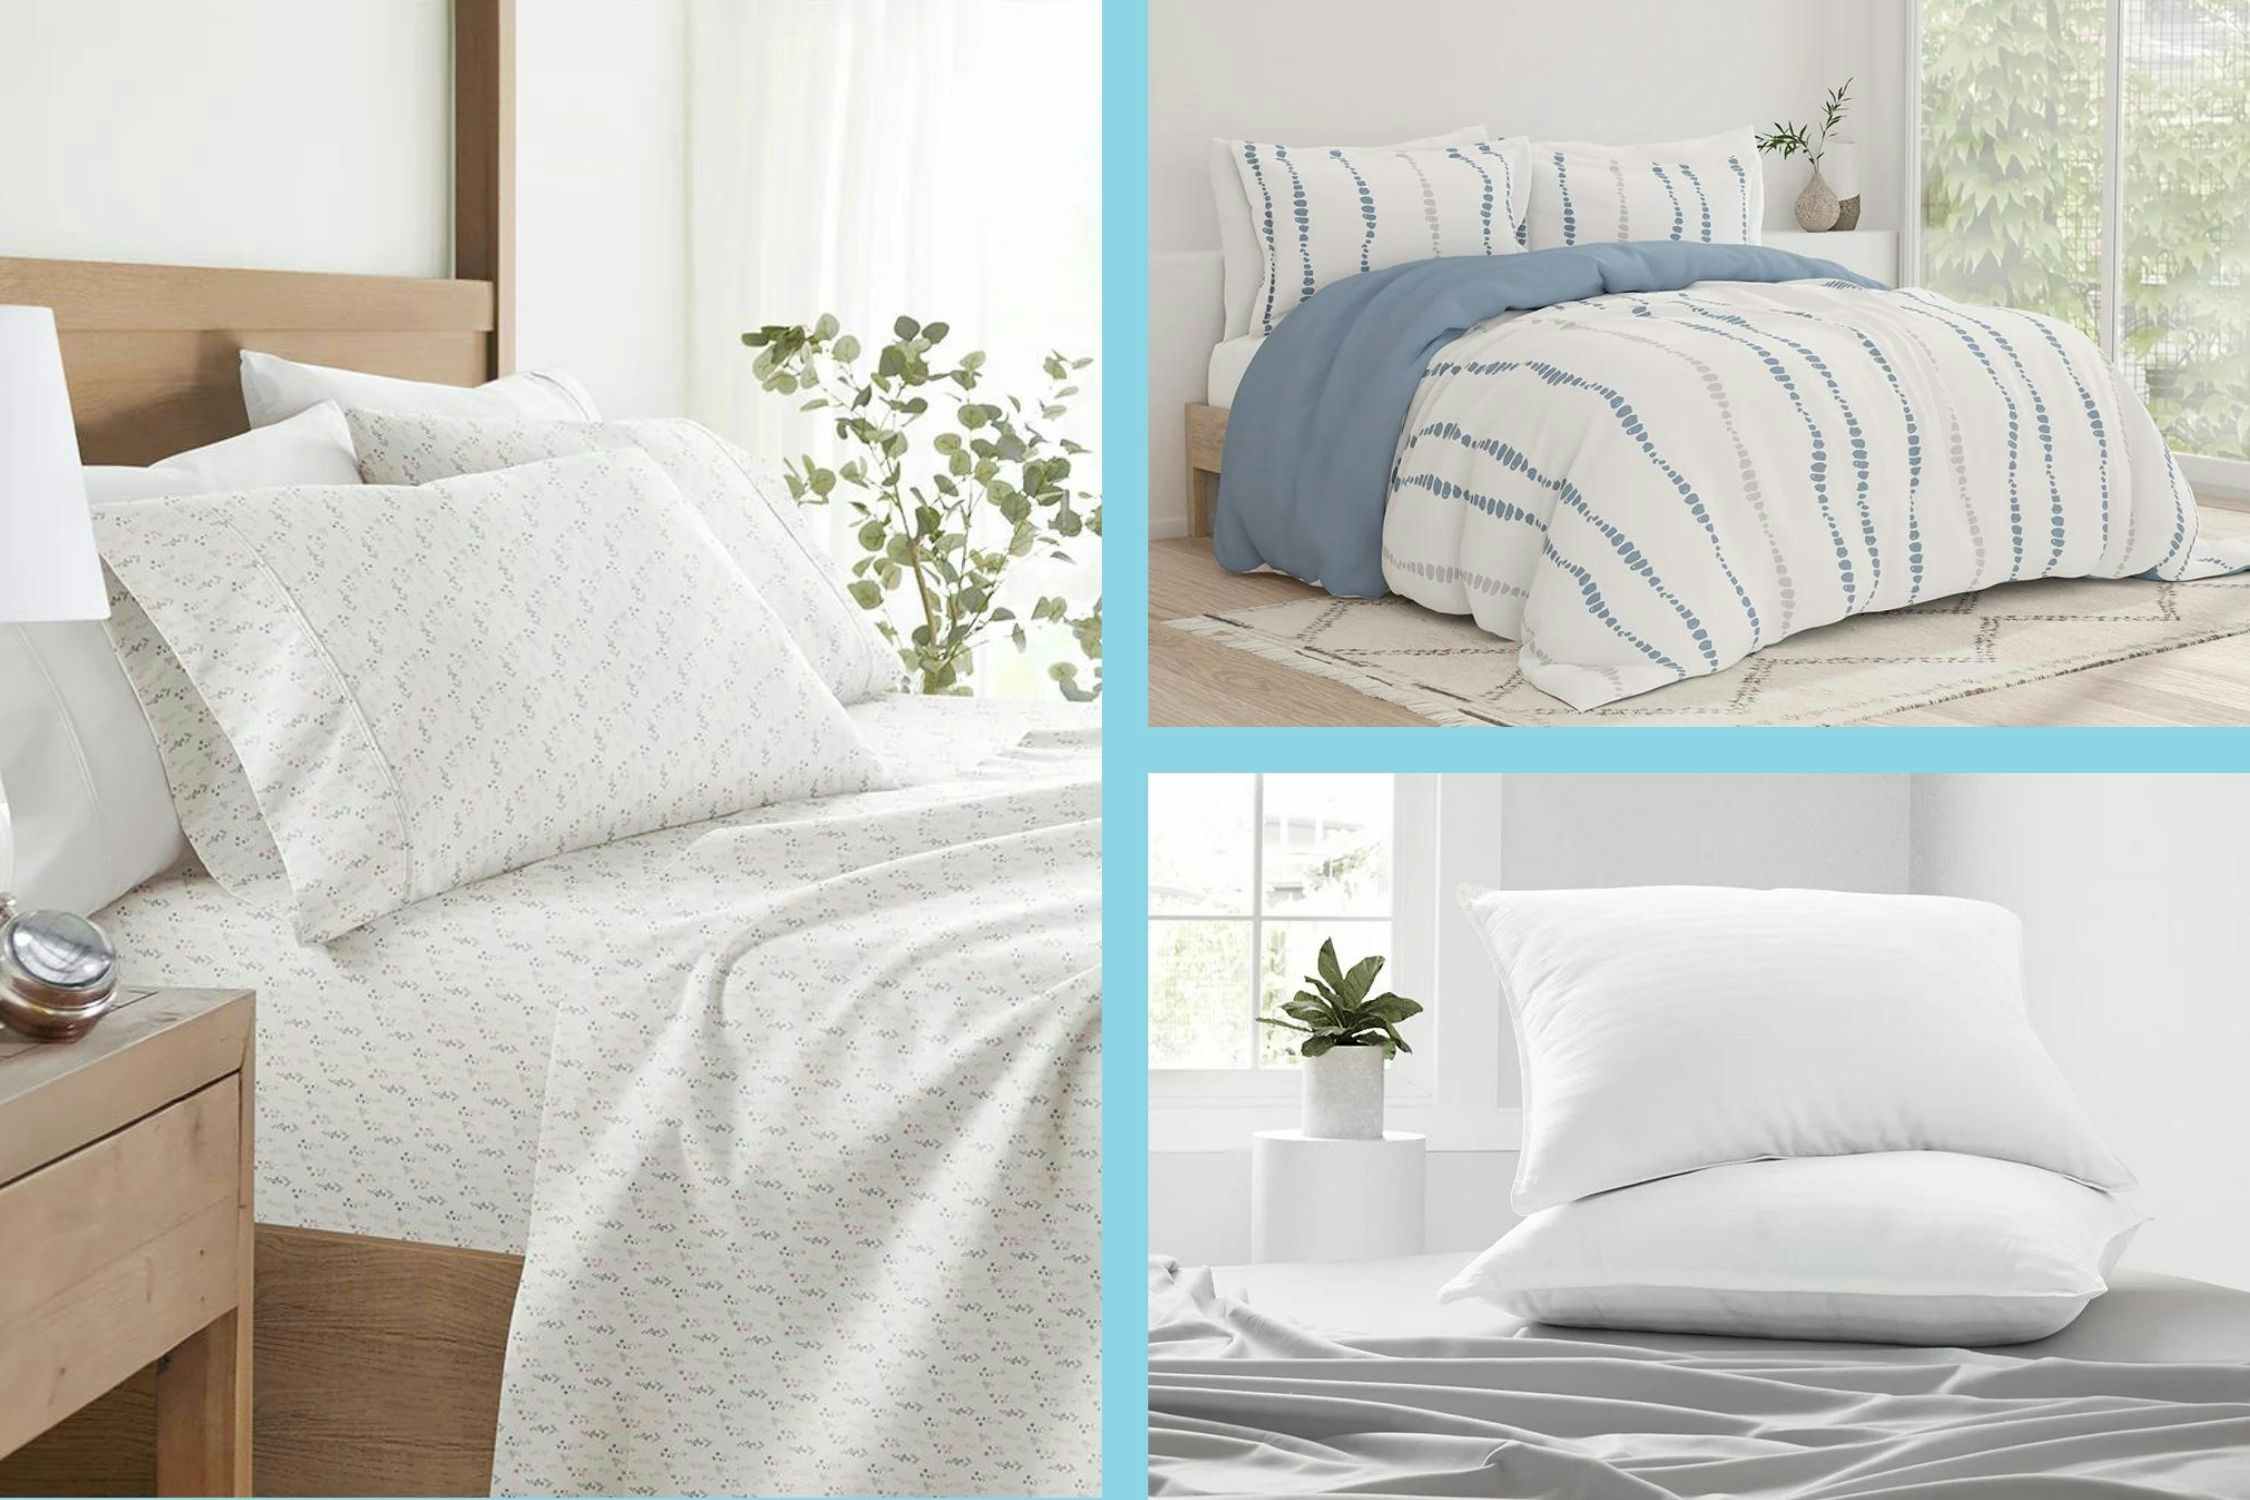 KCL Exclusive: $22 Patterned Sheets, $24 Duvet Cover Set at Linens & Hutch